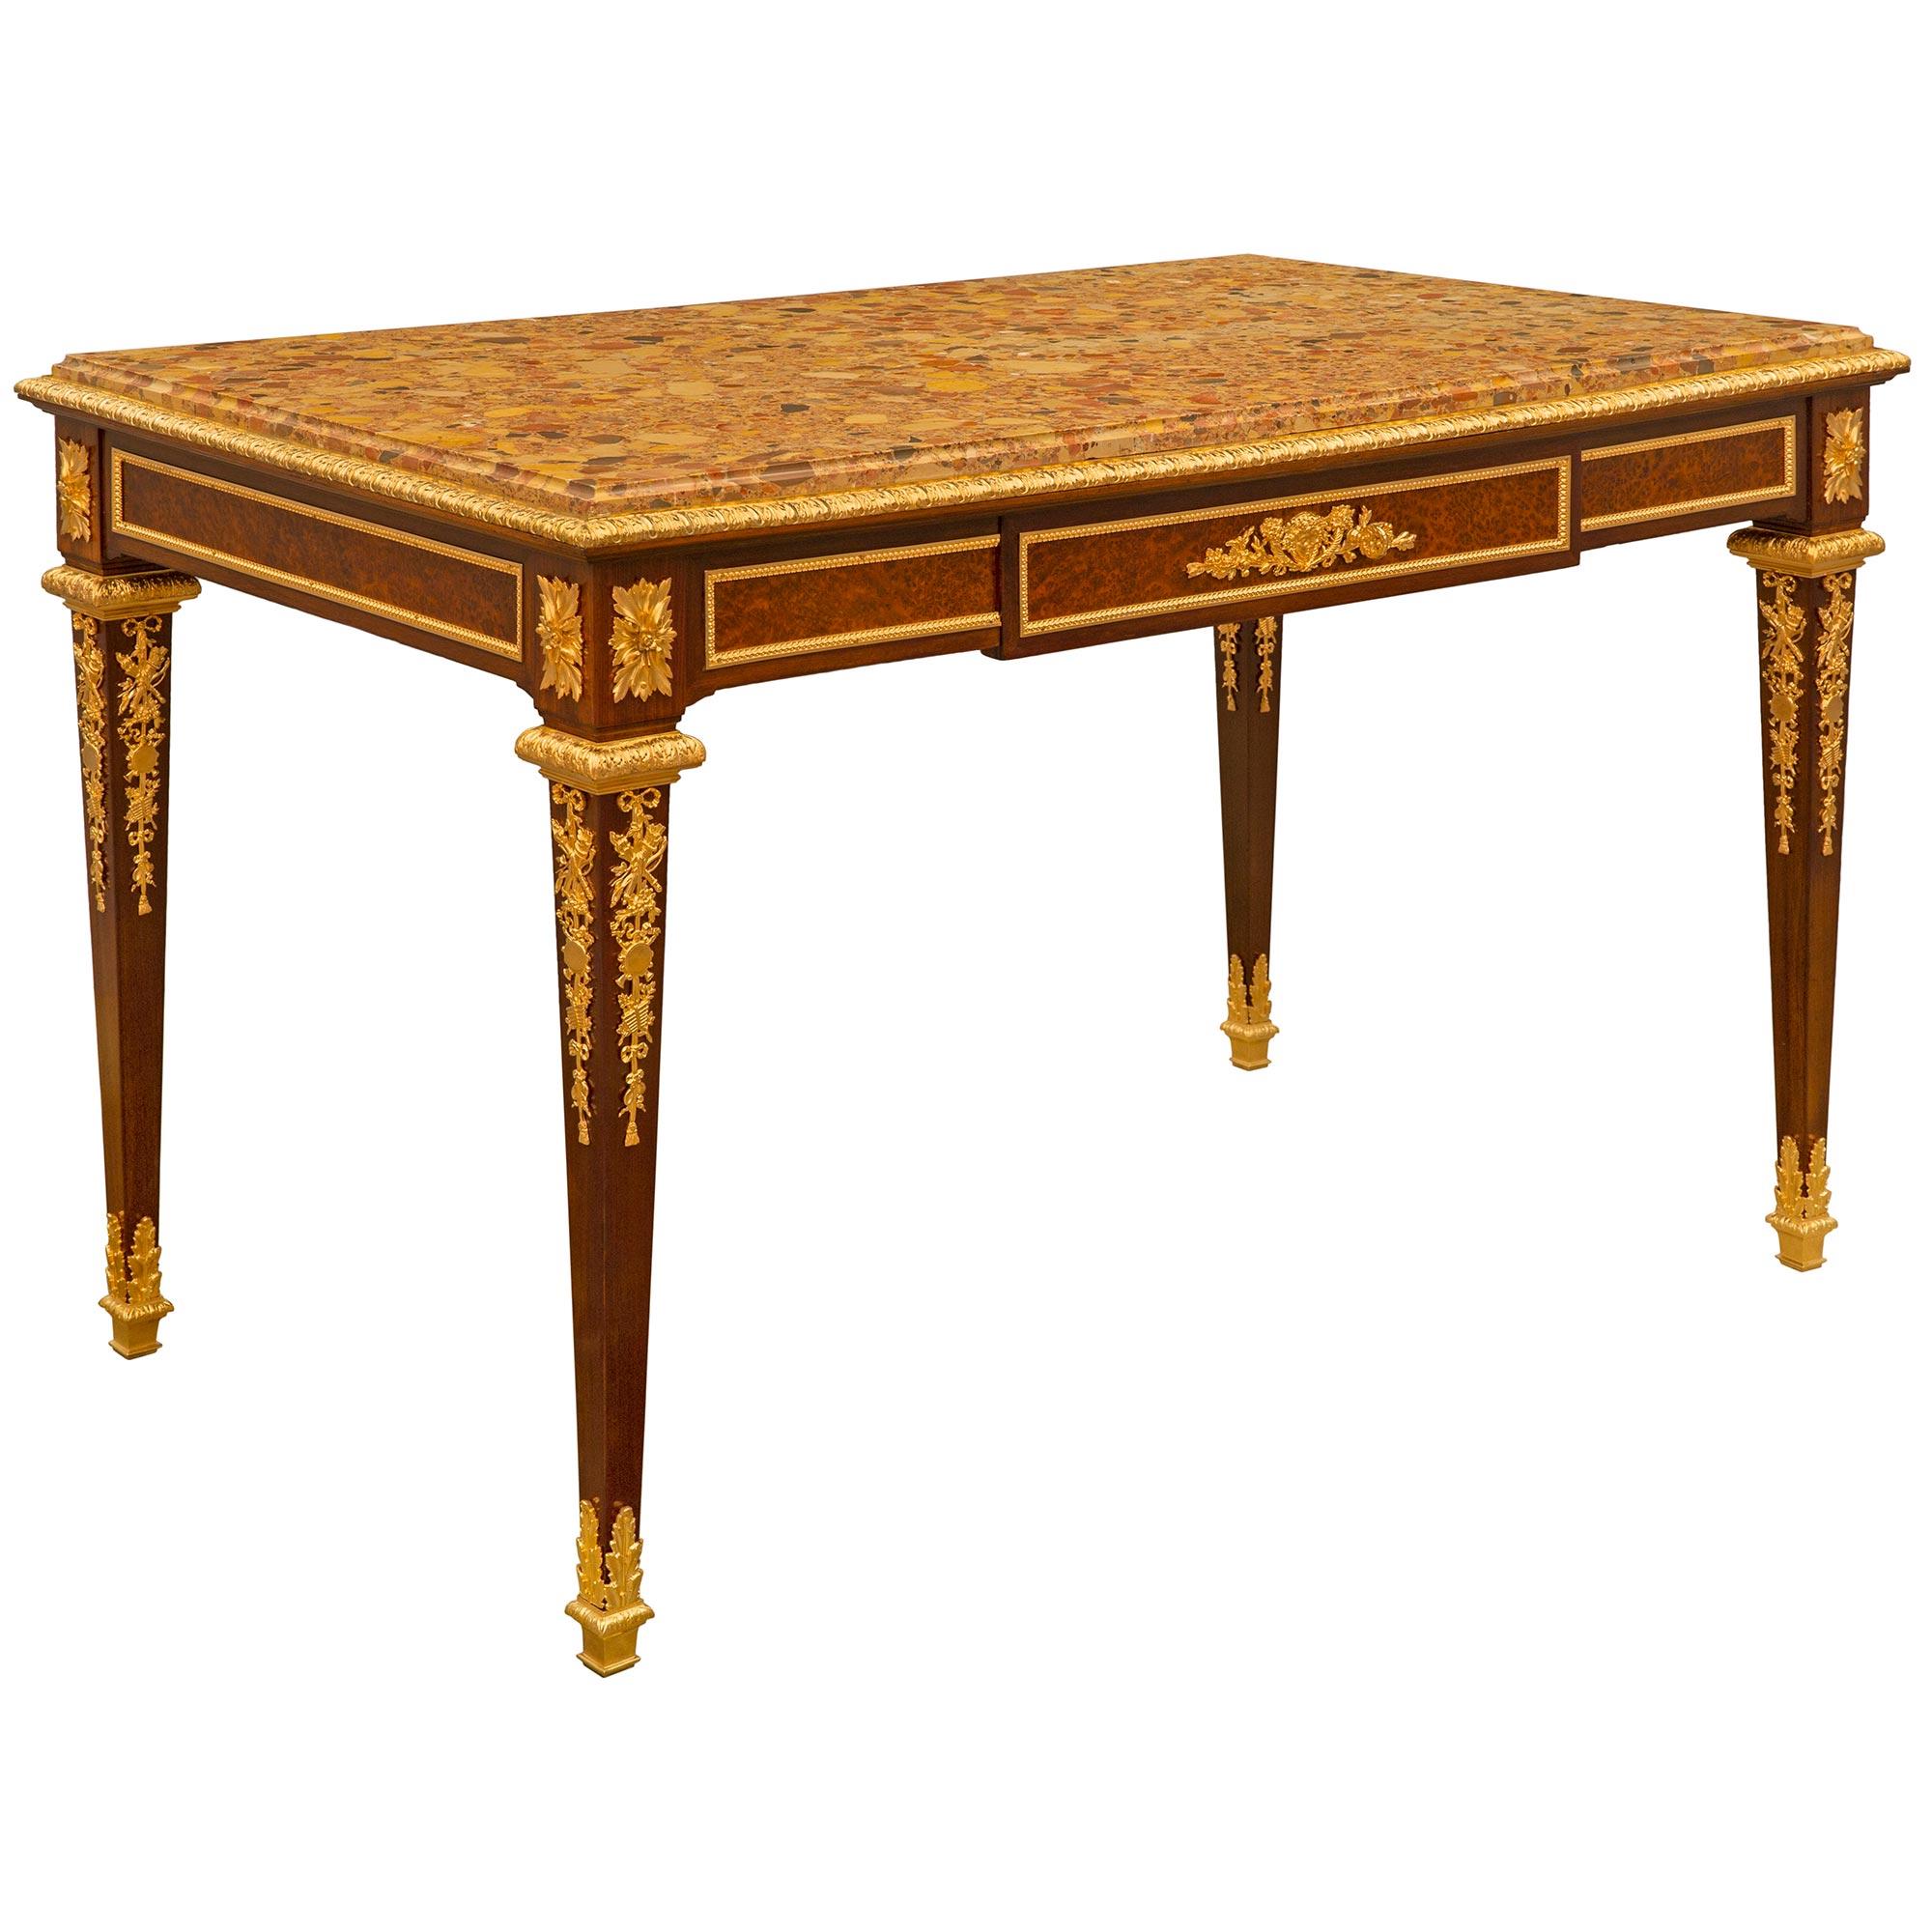 French 19th Century Louis XVI St. Belle Époque Period Table Attributed to Linke In Good Condition For Sale In West Palm Beach, FL